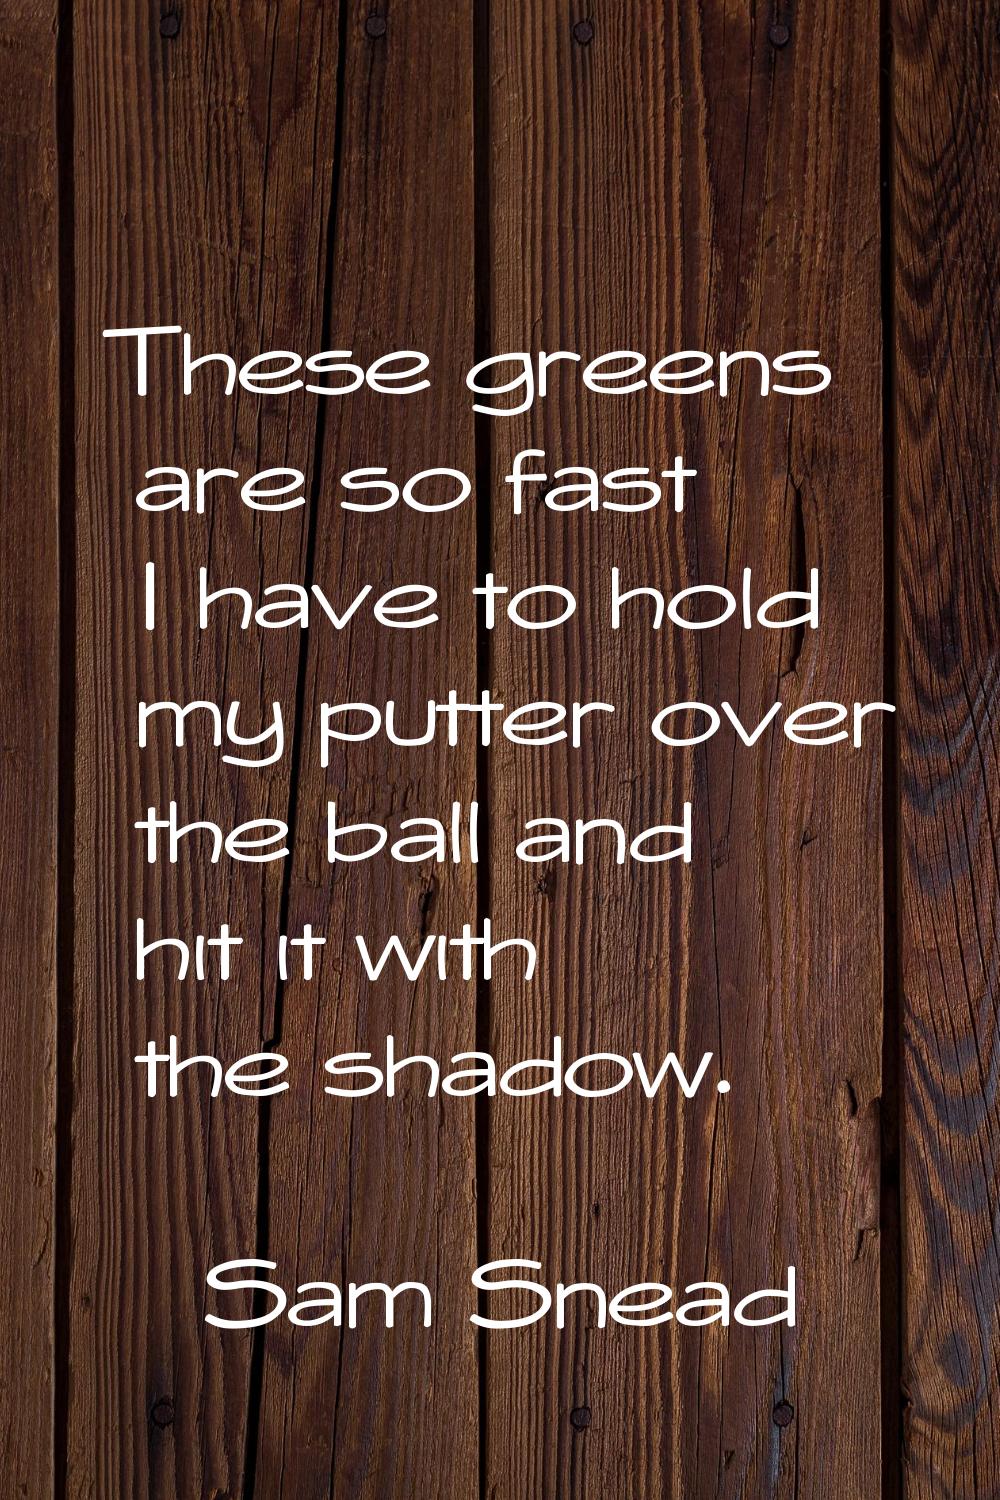 These greens are so fast I have to hold my putter over the ball and hit it with the shadow.